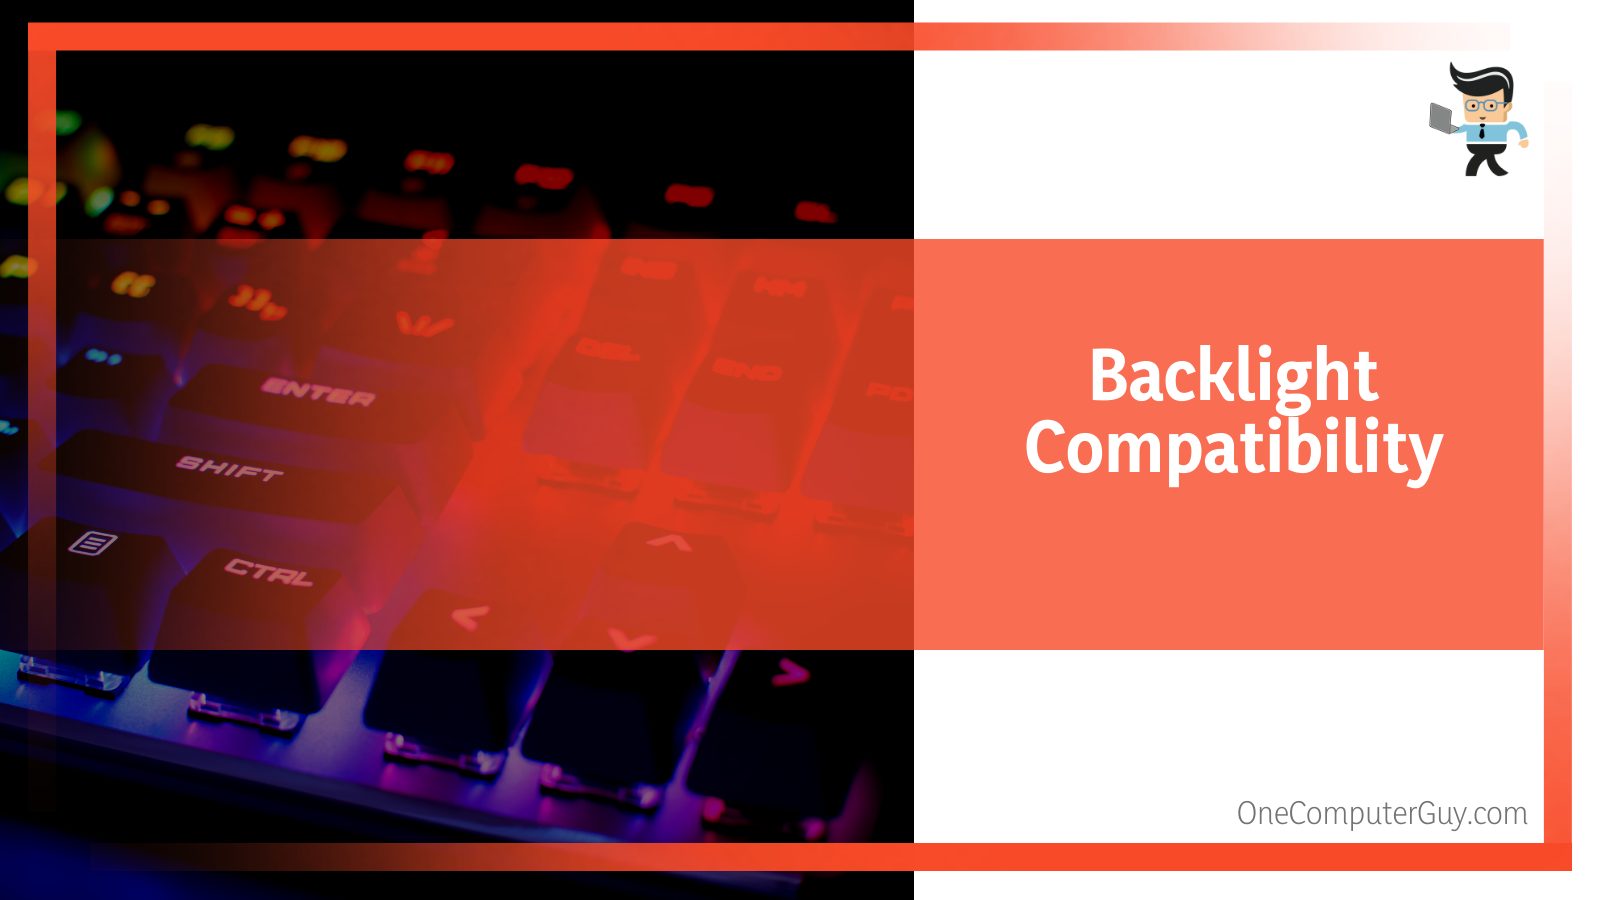 Backlight Compatibility